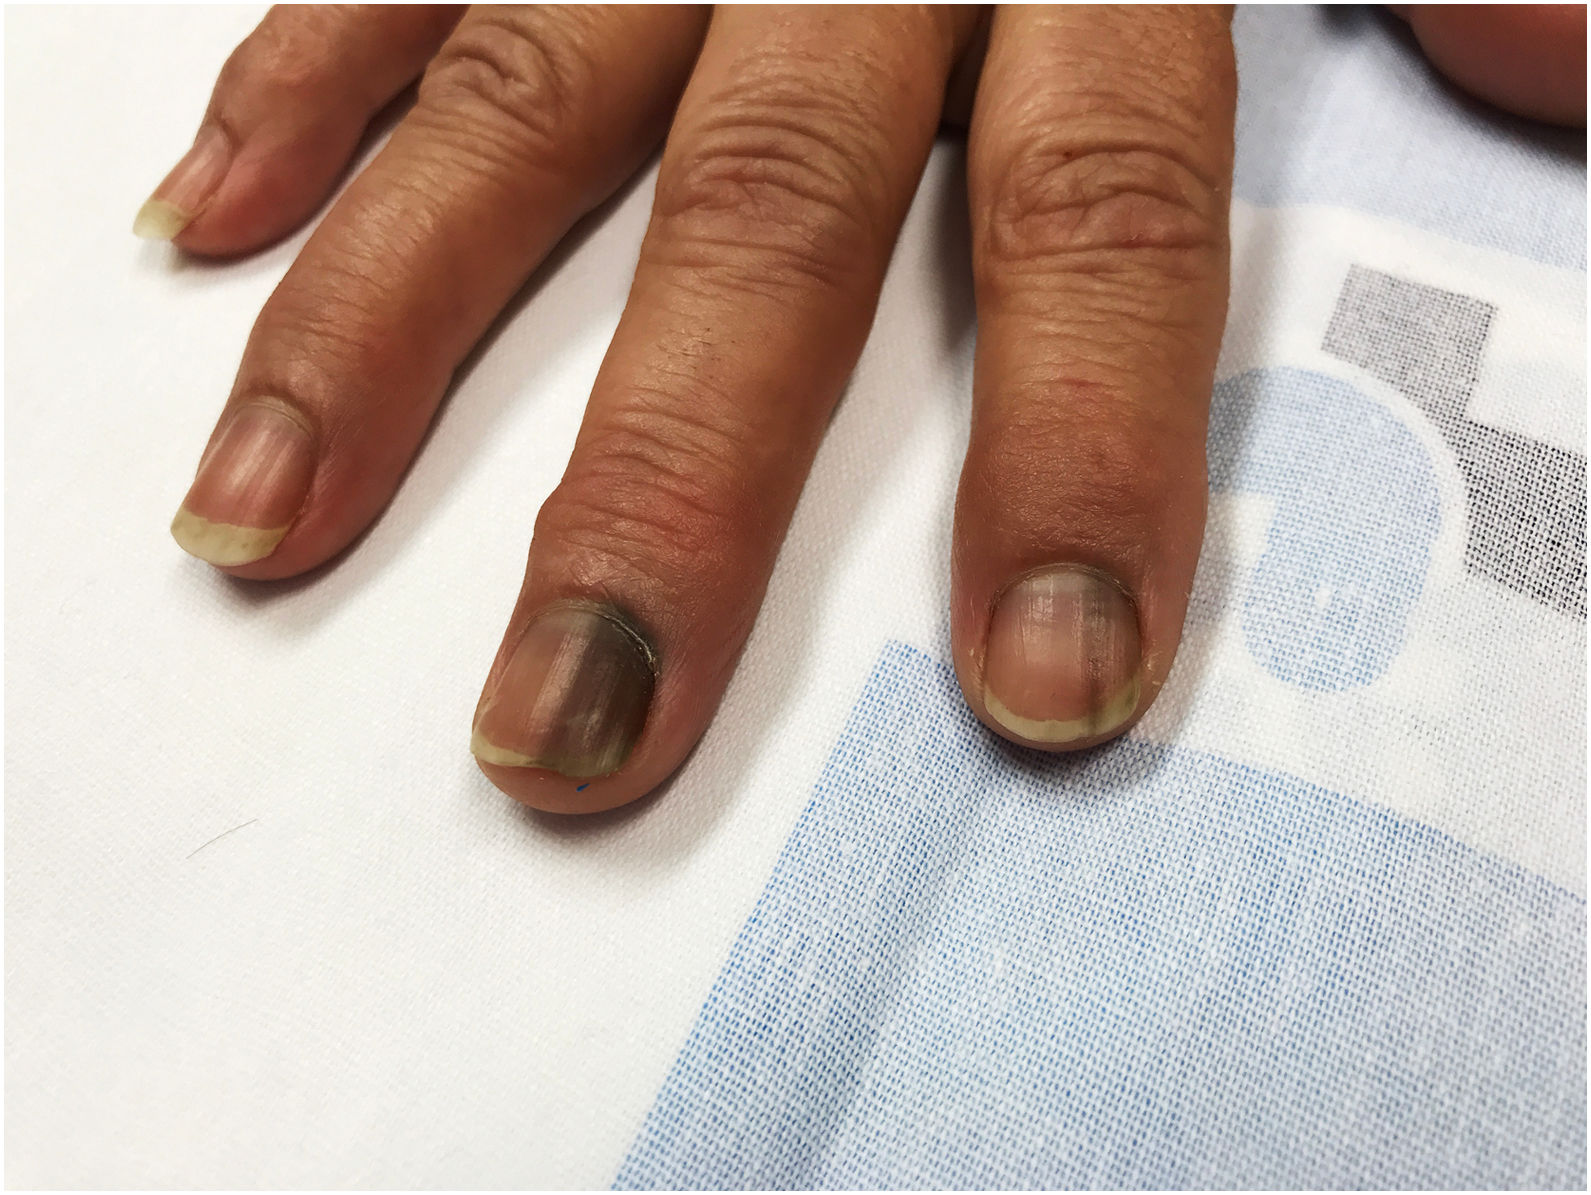 What Explains This Man's Nail Discoloration? | Consultant360